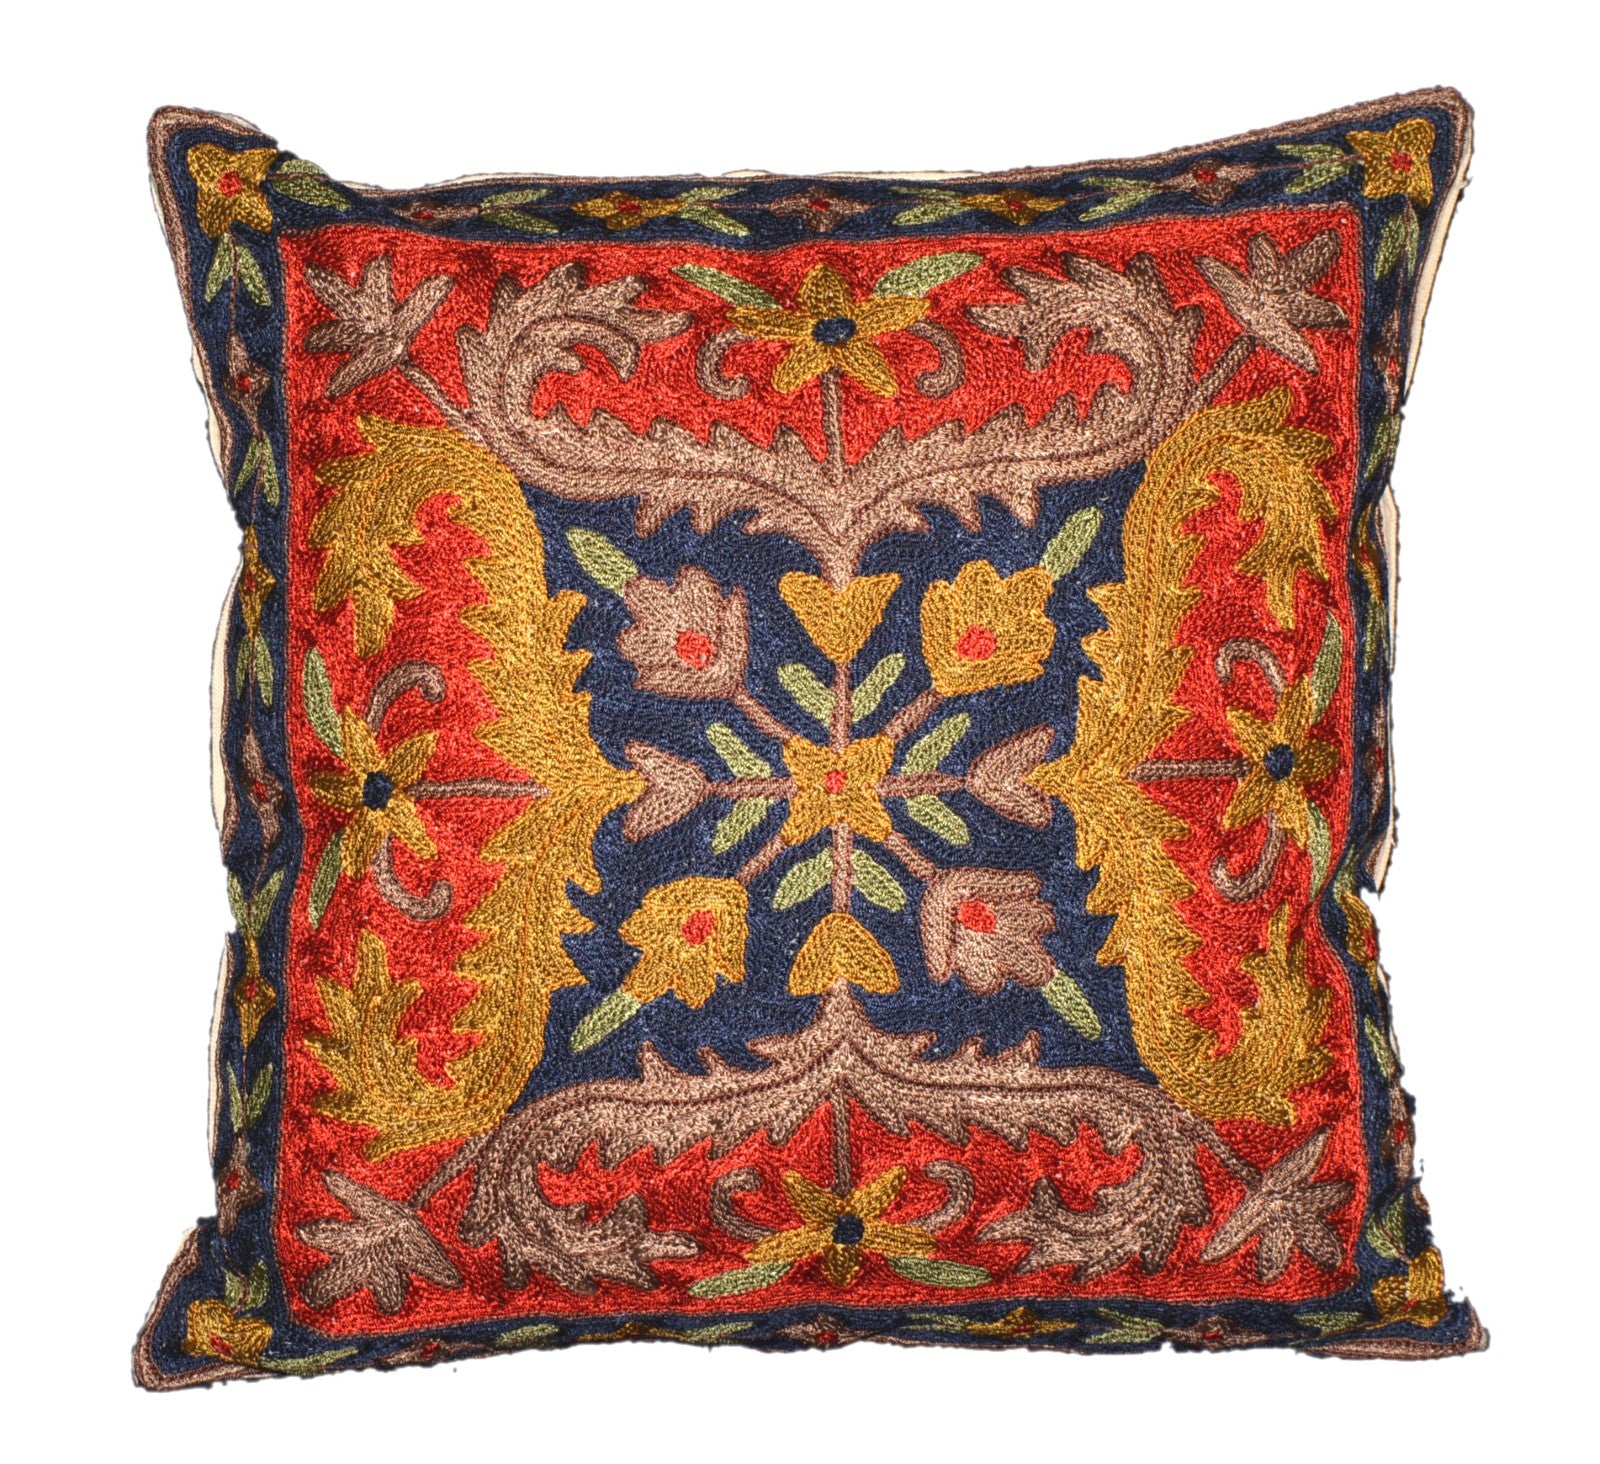 Crewel Silk Embroidered Cushion Throw Pillow Cover, Multicolor #CW2013